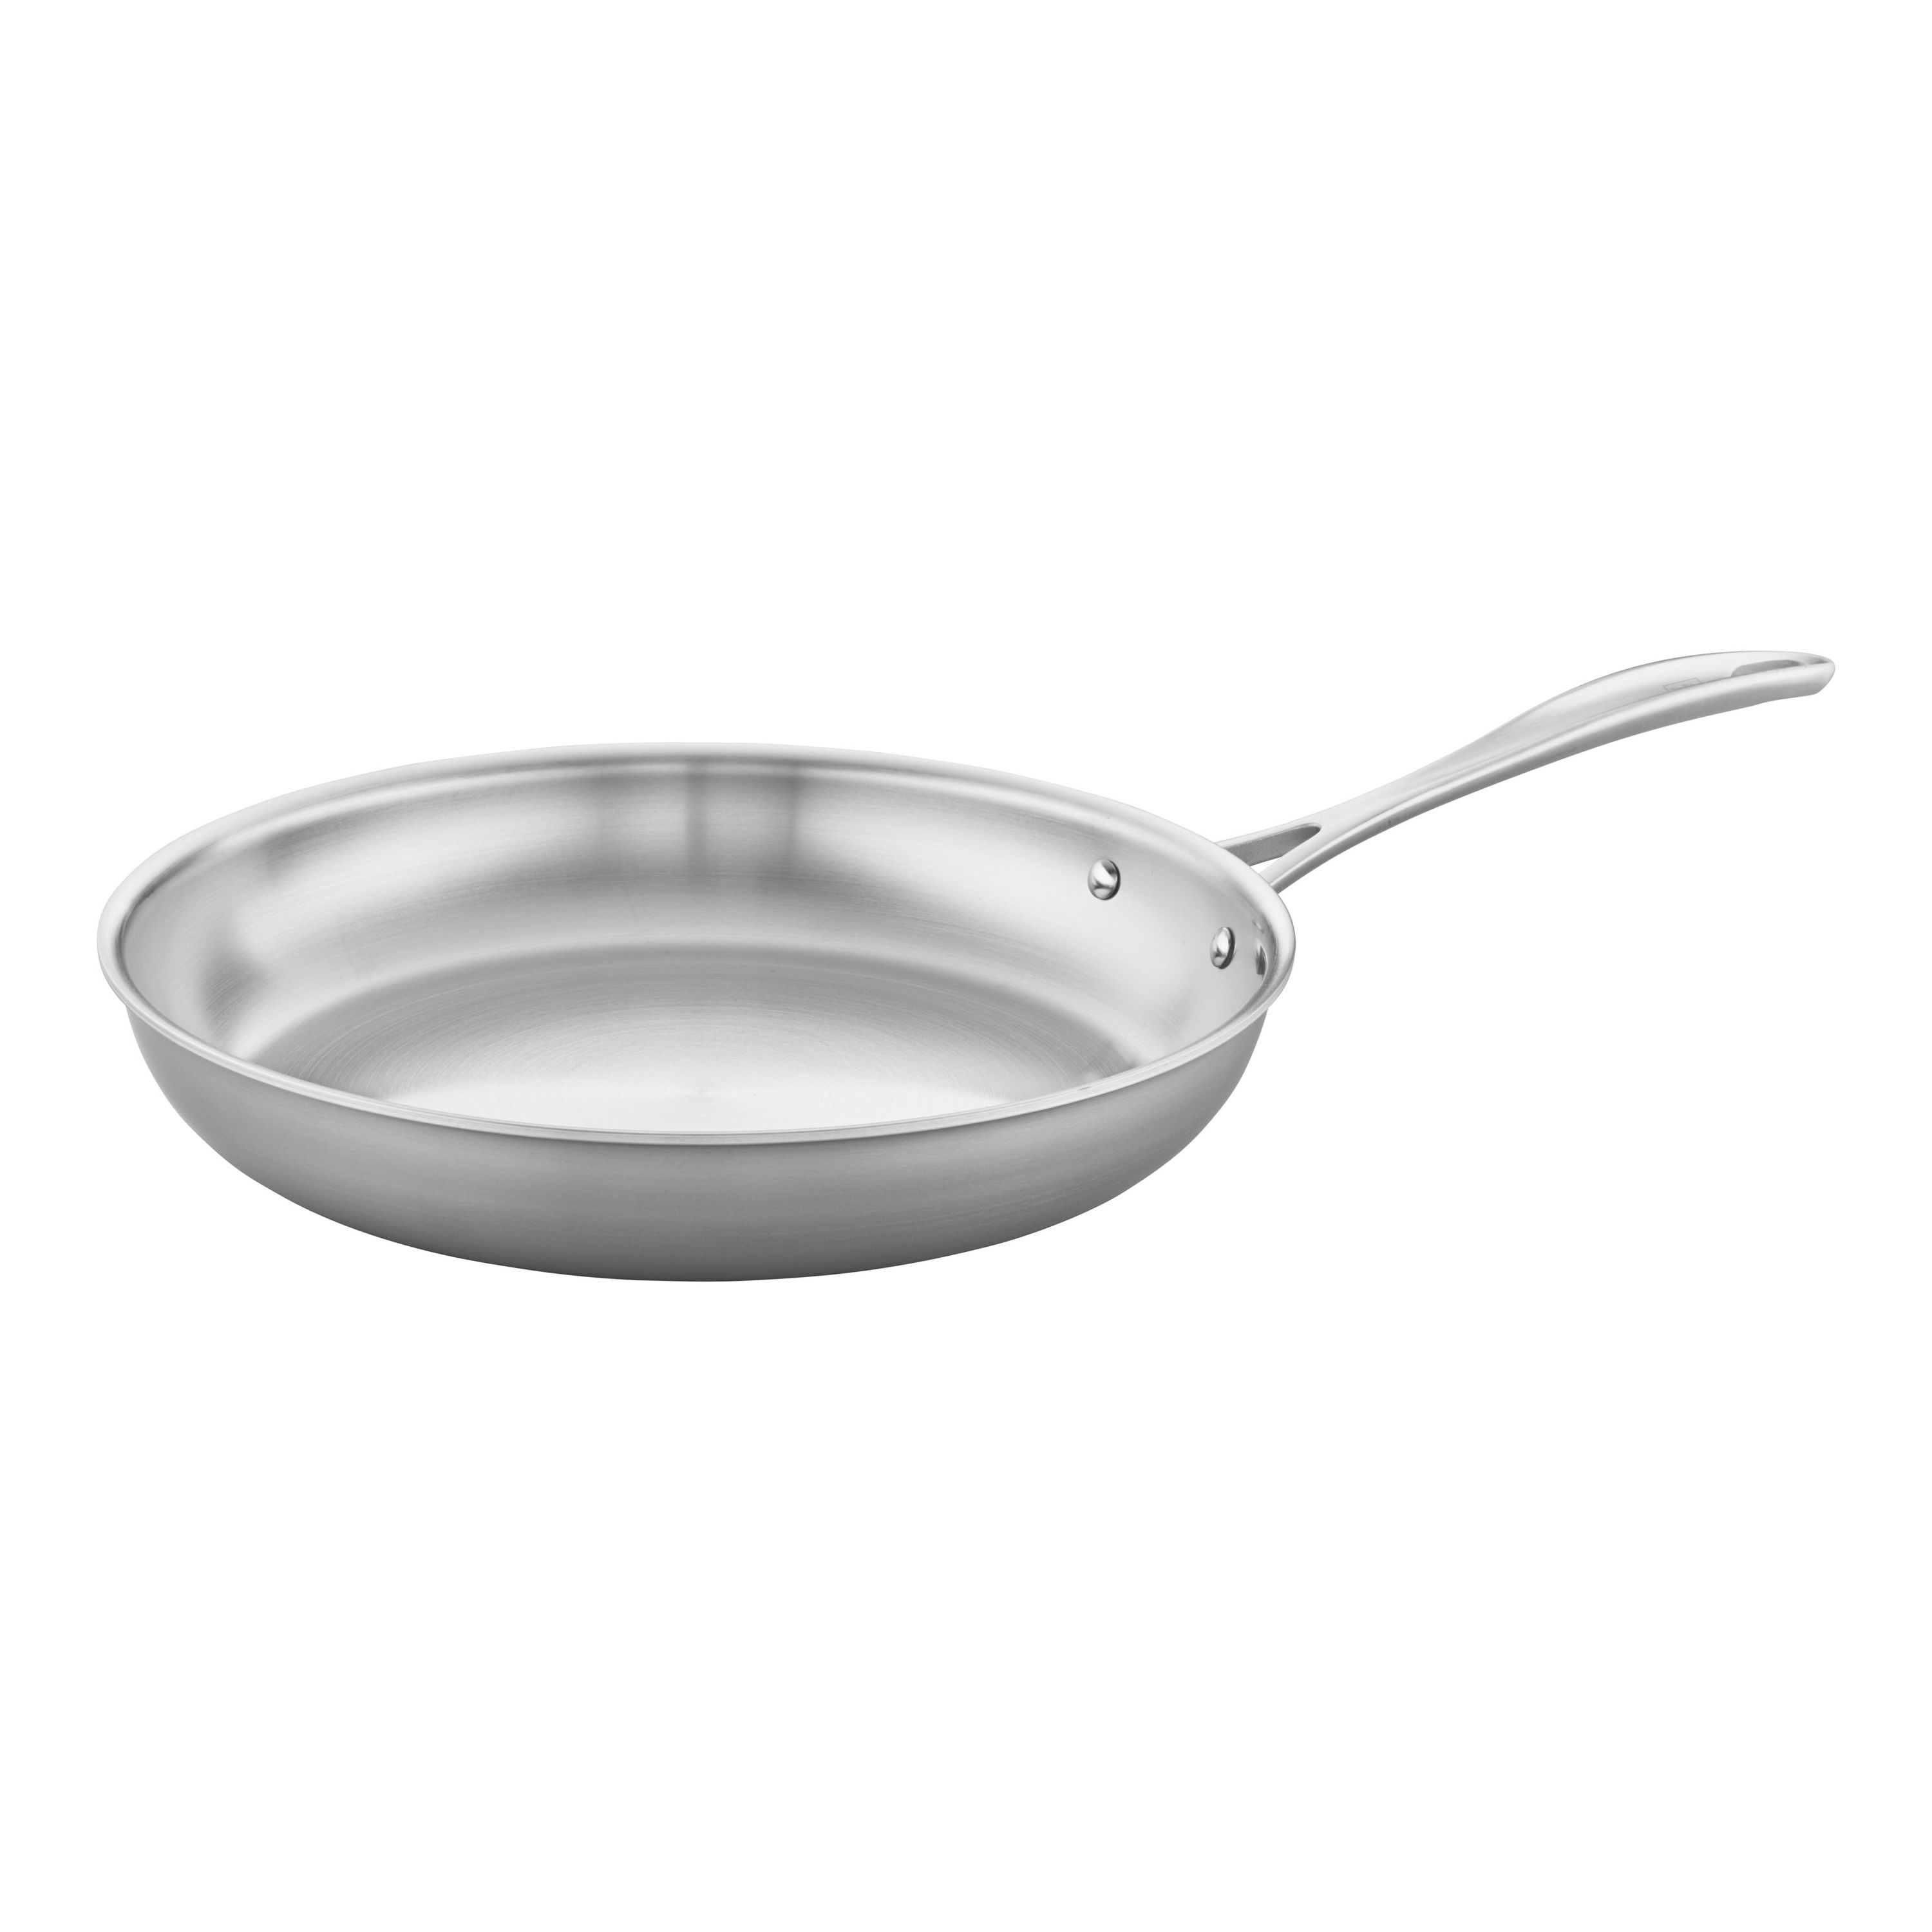 ZWILLING Spirit 3-ply 8-inch Stainless Steel Fry Pan, 8-inch - Kroger